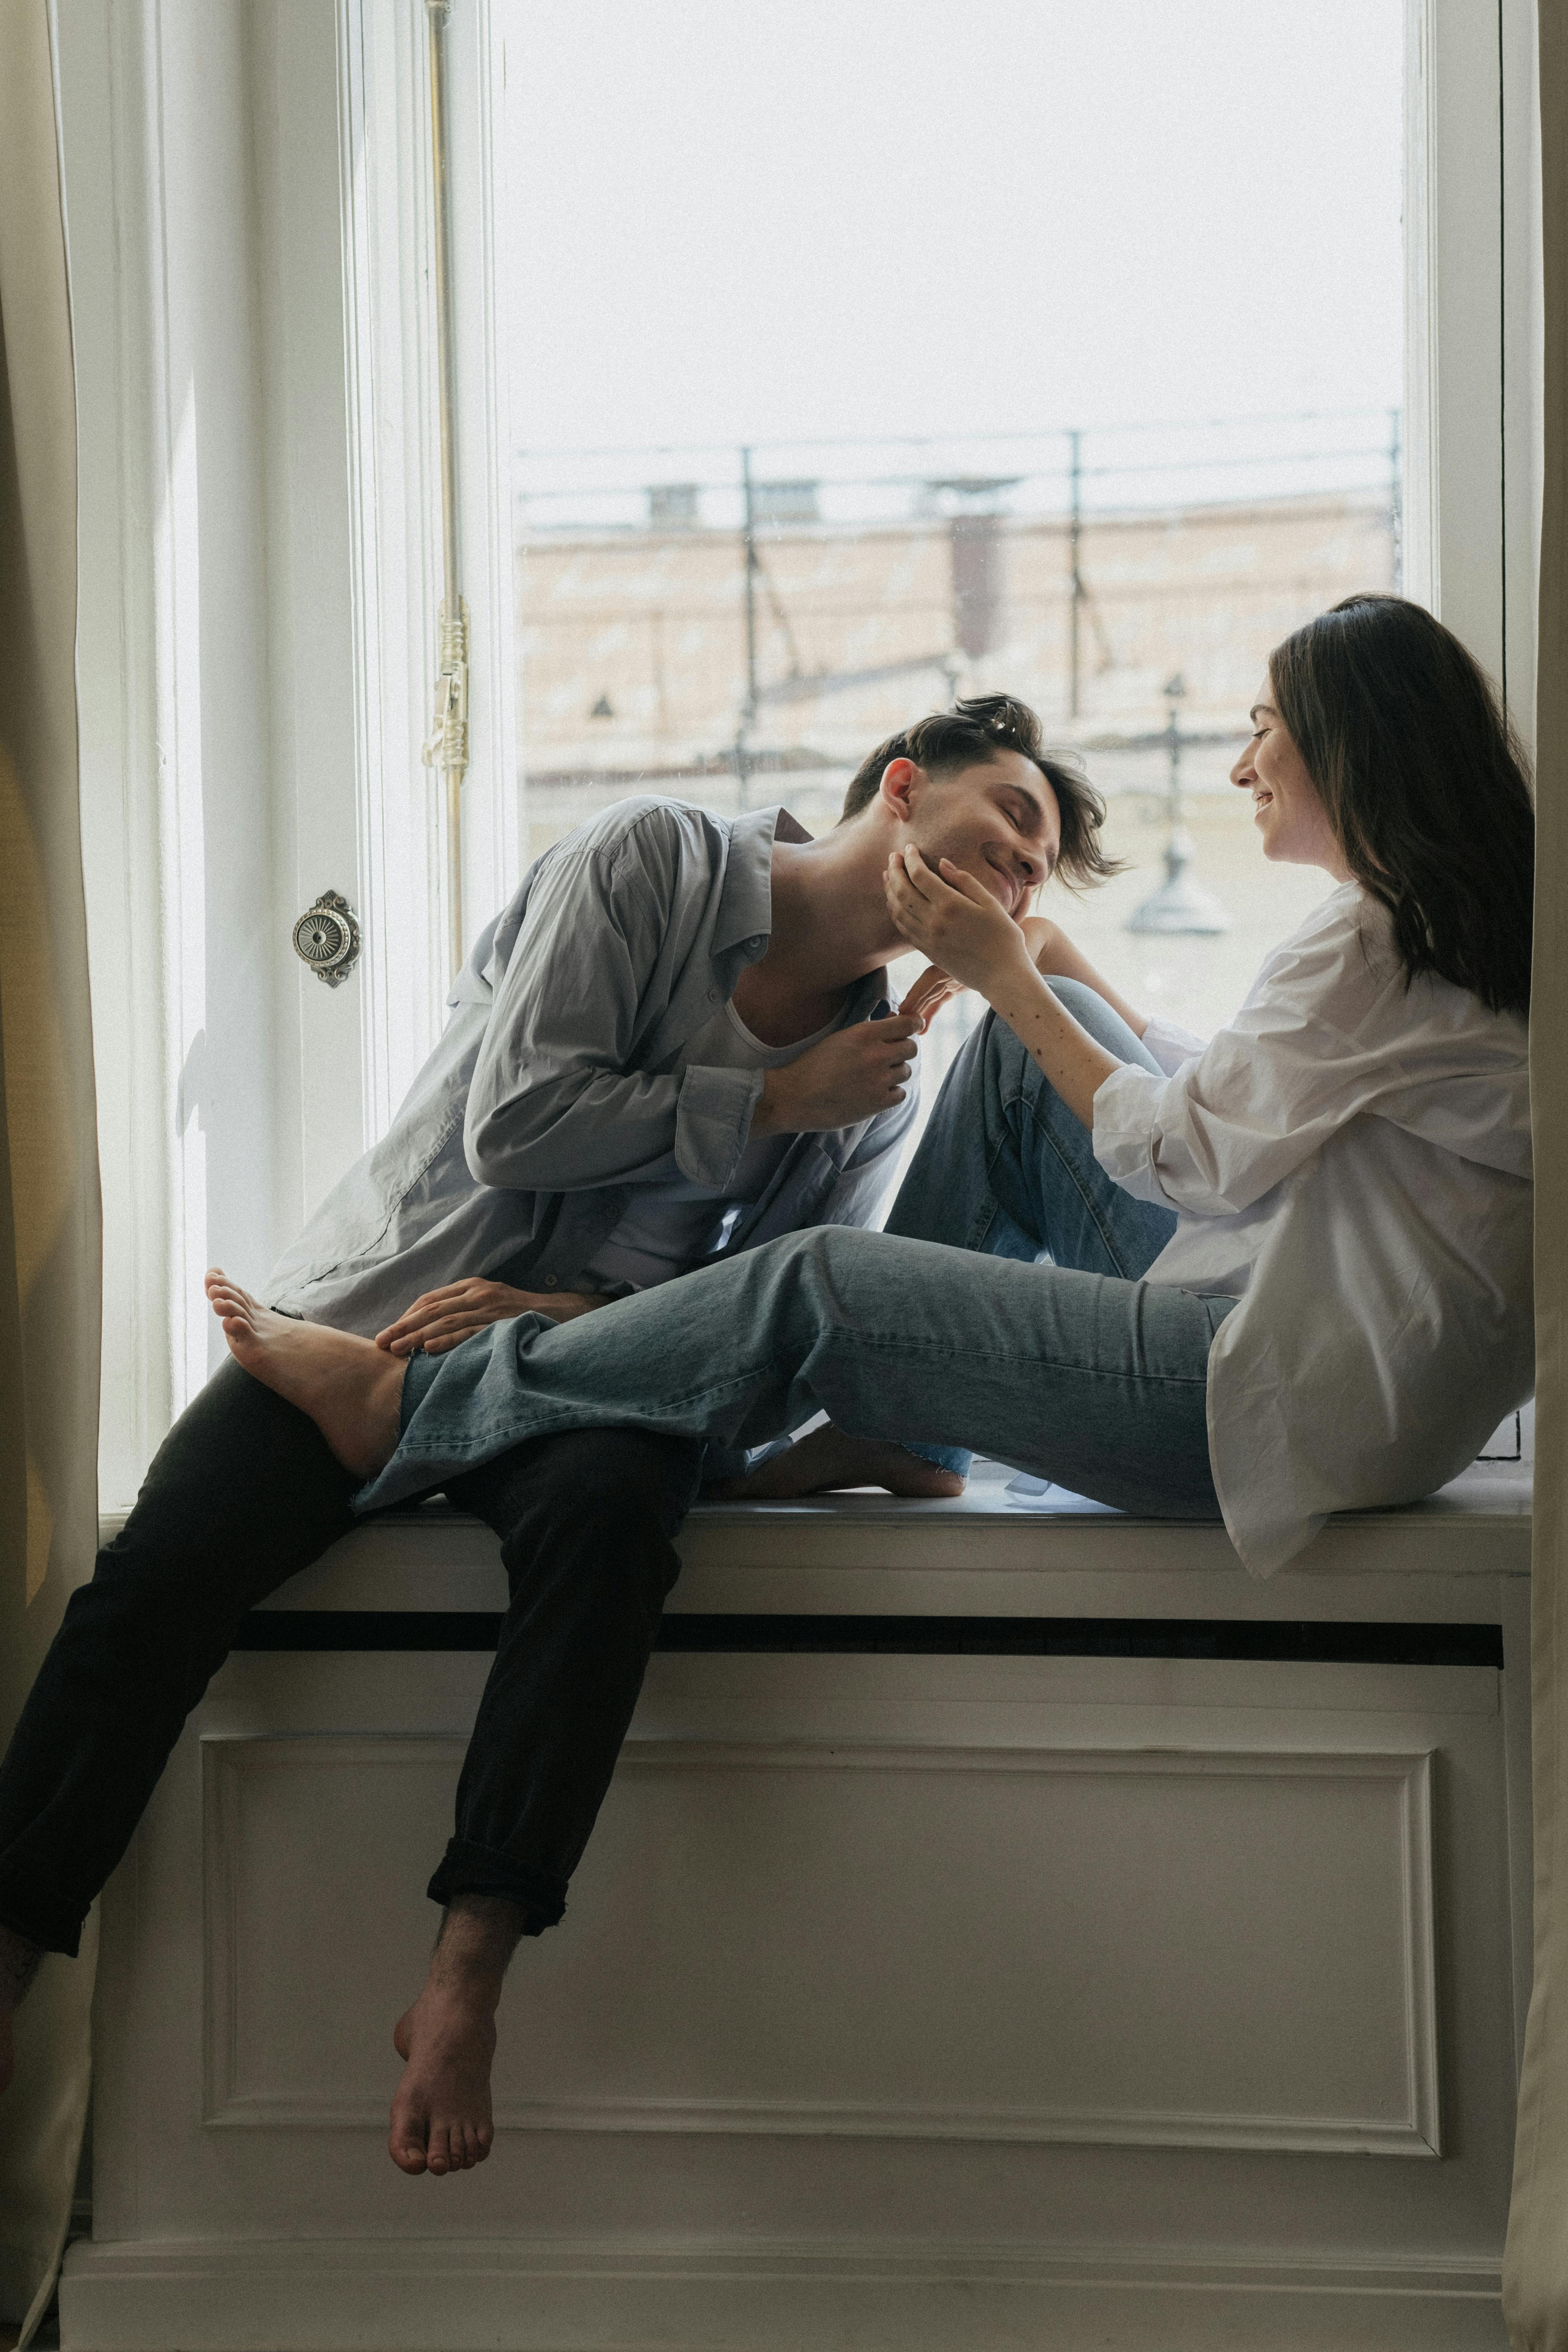 A happy couple hanging out on a windowsill | Source: Pexels